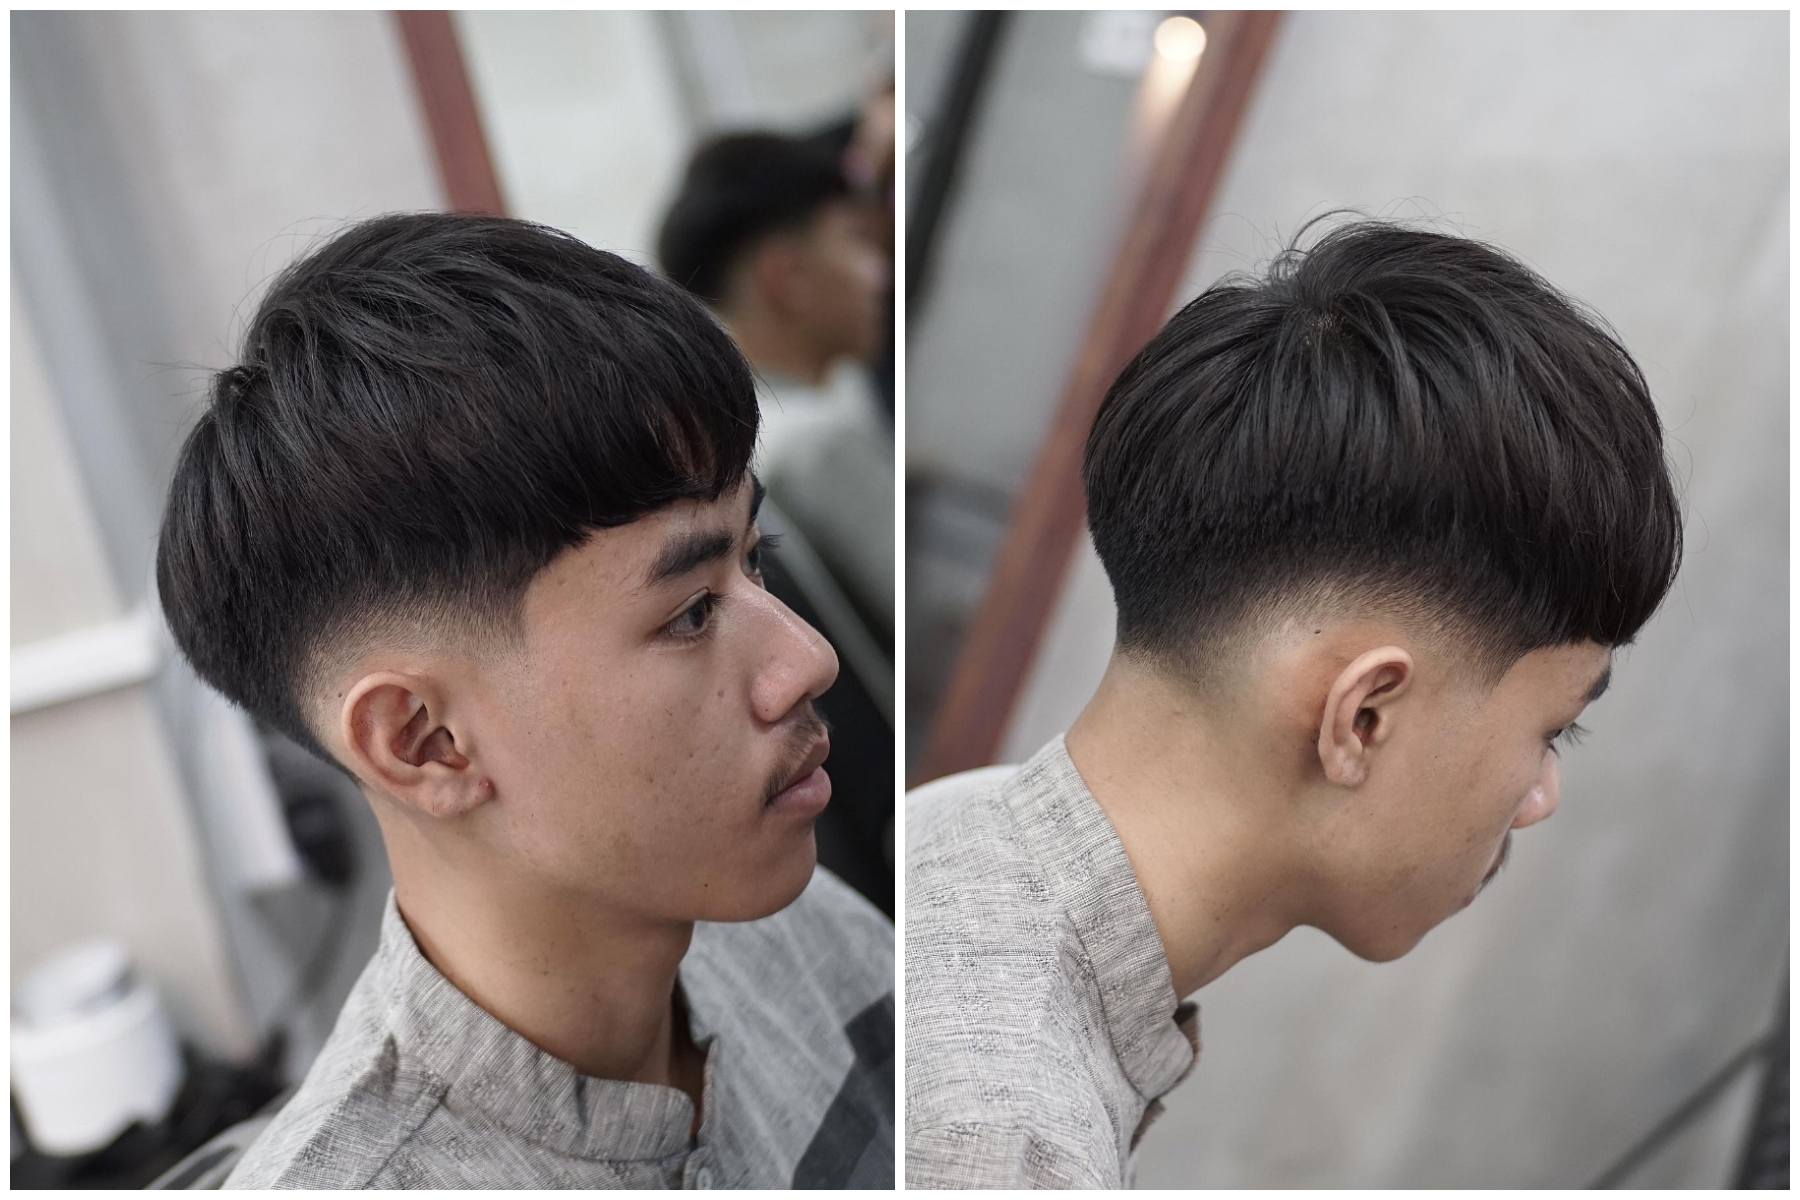 Ask For Your Next Haircut Like This ! 💇🏻‍♂️ | Gallery posted by NatNat |  Lemon8